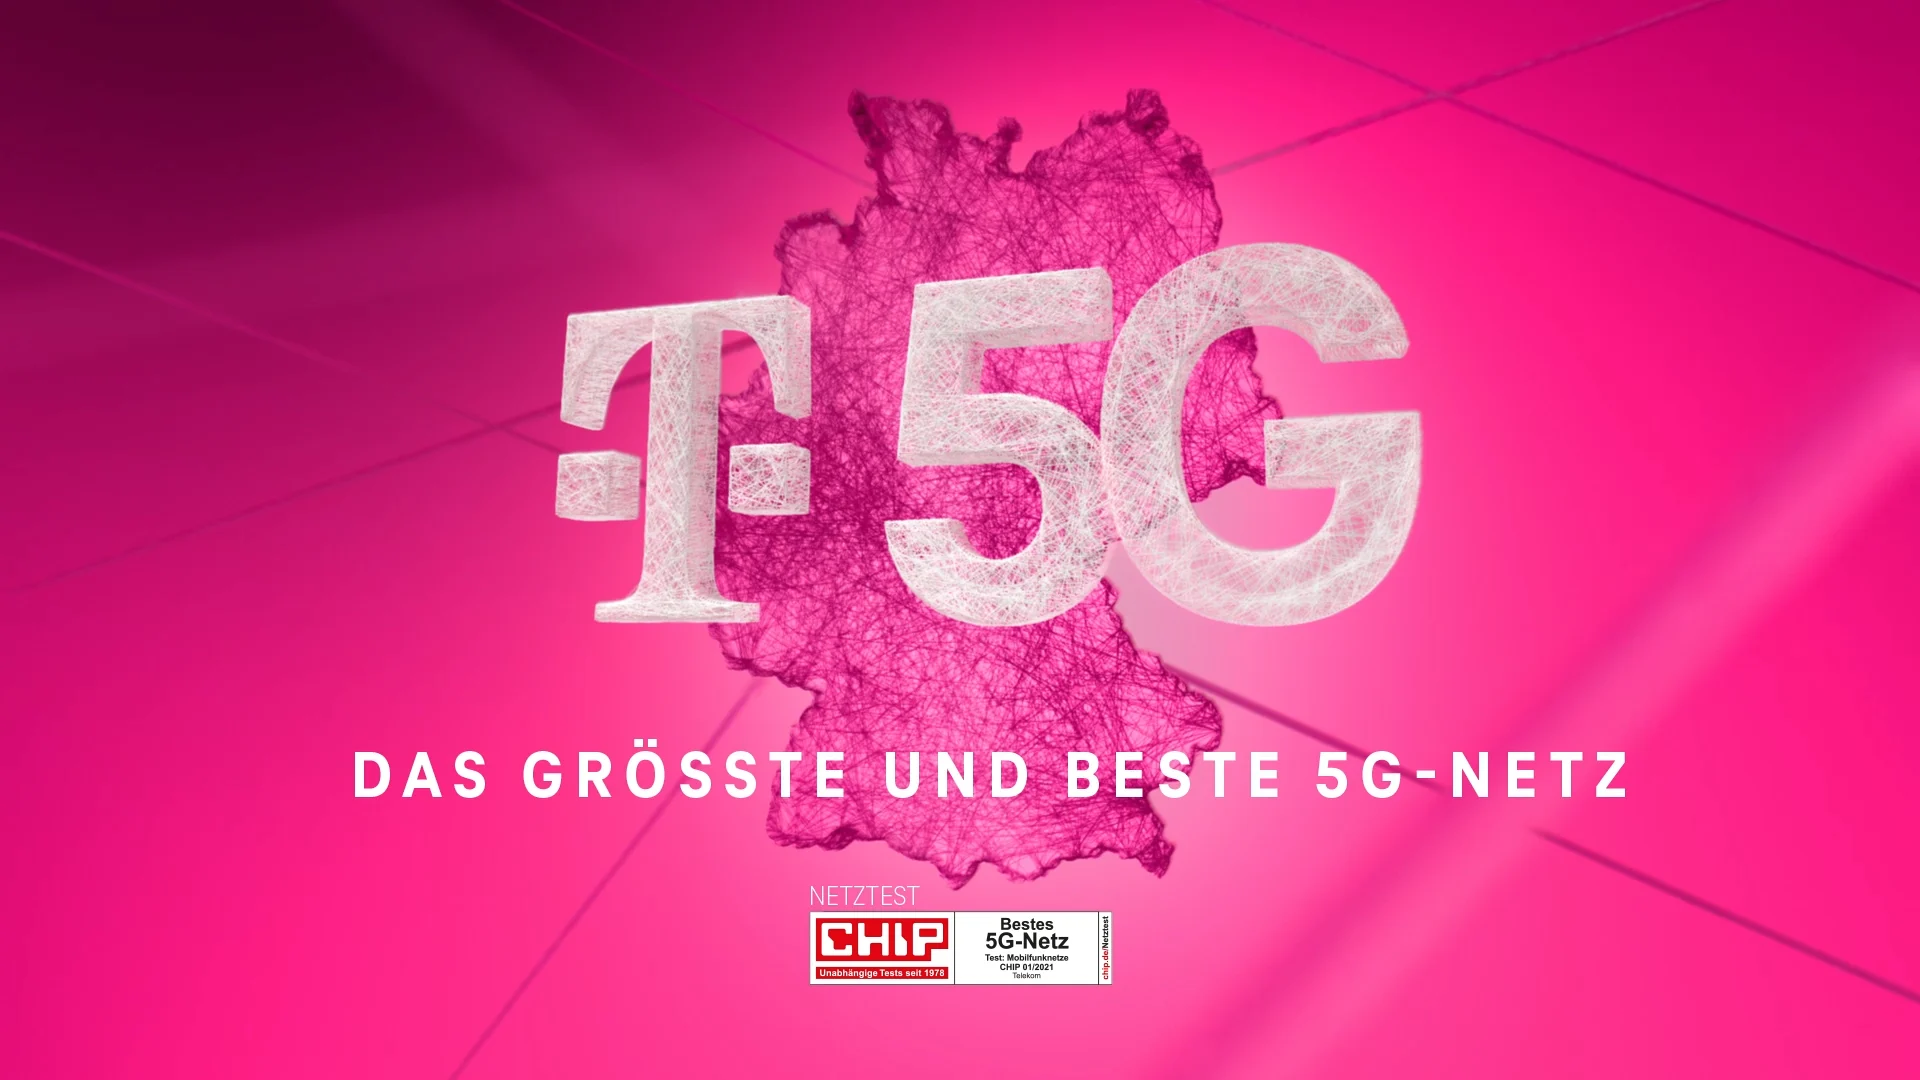 Telekom Keyvisual consiting out of the letters T5G in front of the shape of Germany. All consisting out of a weaved structure of white lines.